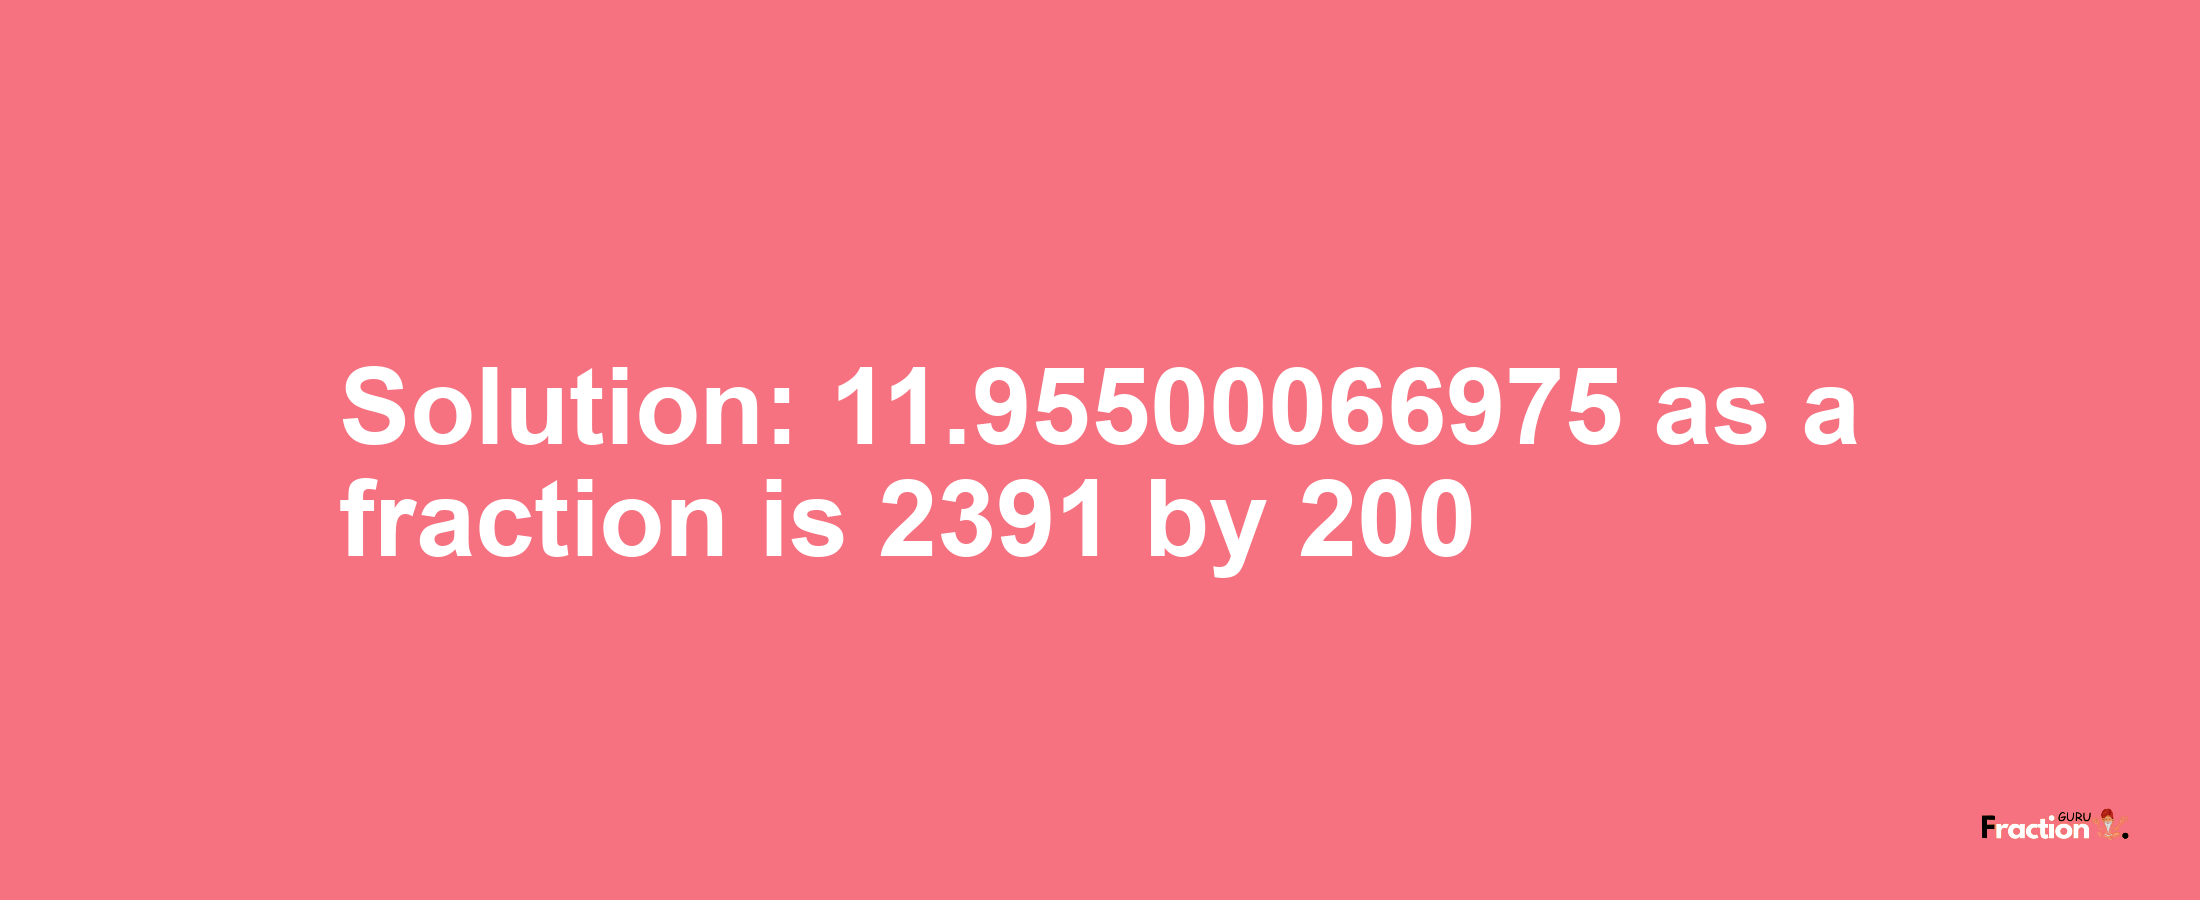 Solution:11.95500066975 as a fraction is 2391/200